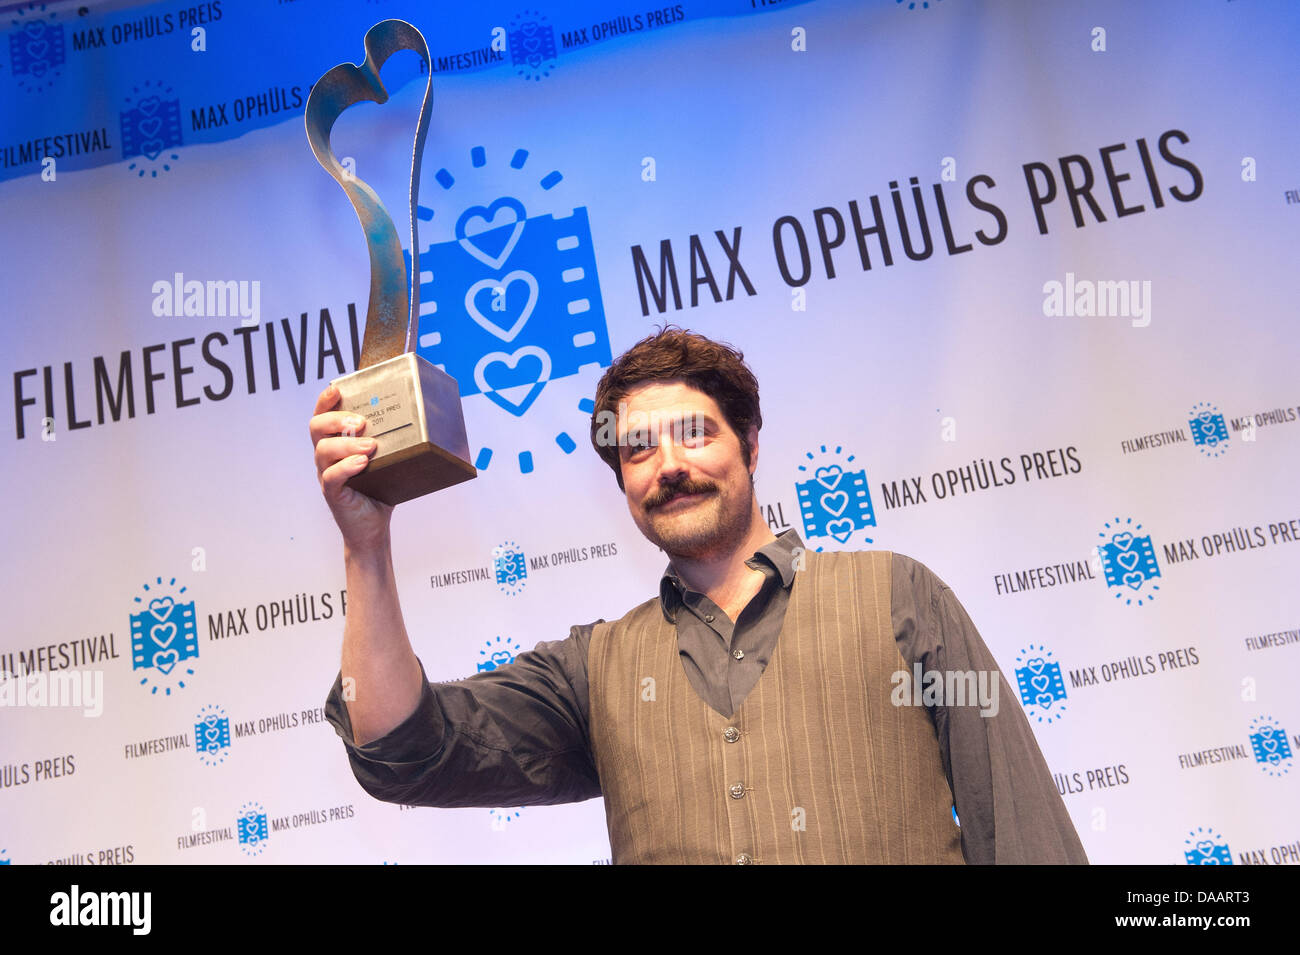 Director Johannes Naber is awarded with the 32nd Max Ophuels Prize for his film 'The Albanian' in Saarbruecken, Germany, 22 January 2011. The Max Ophuels Prize is a film prize for young directors from German speaking countries. Photo: Oliver Dietze Stock Photo